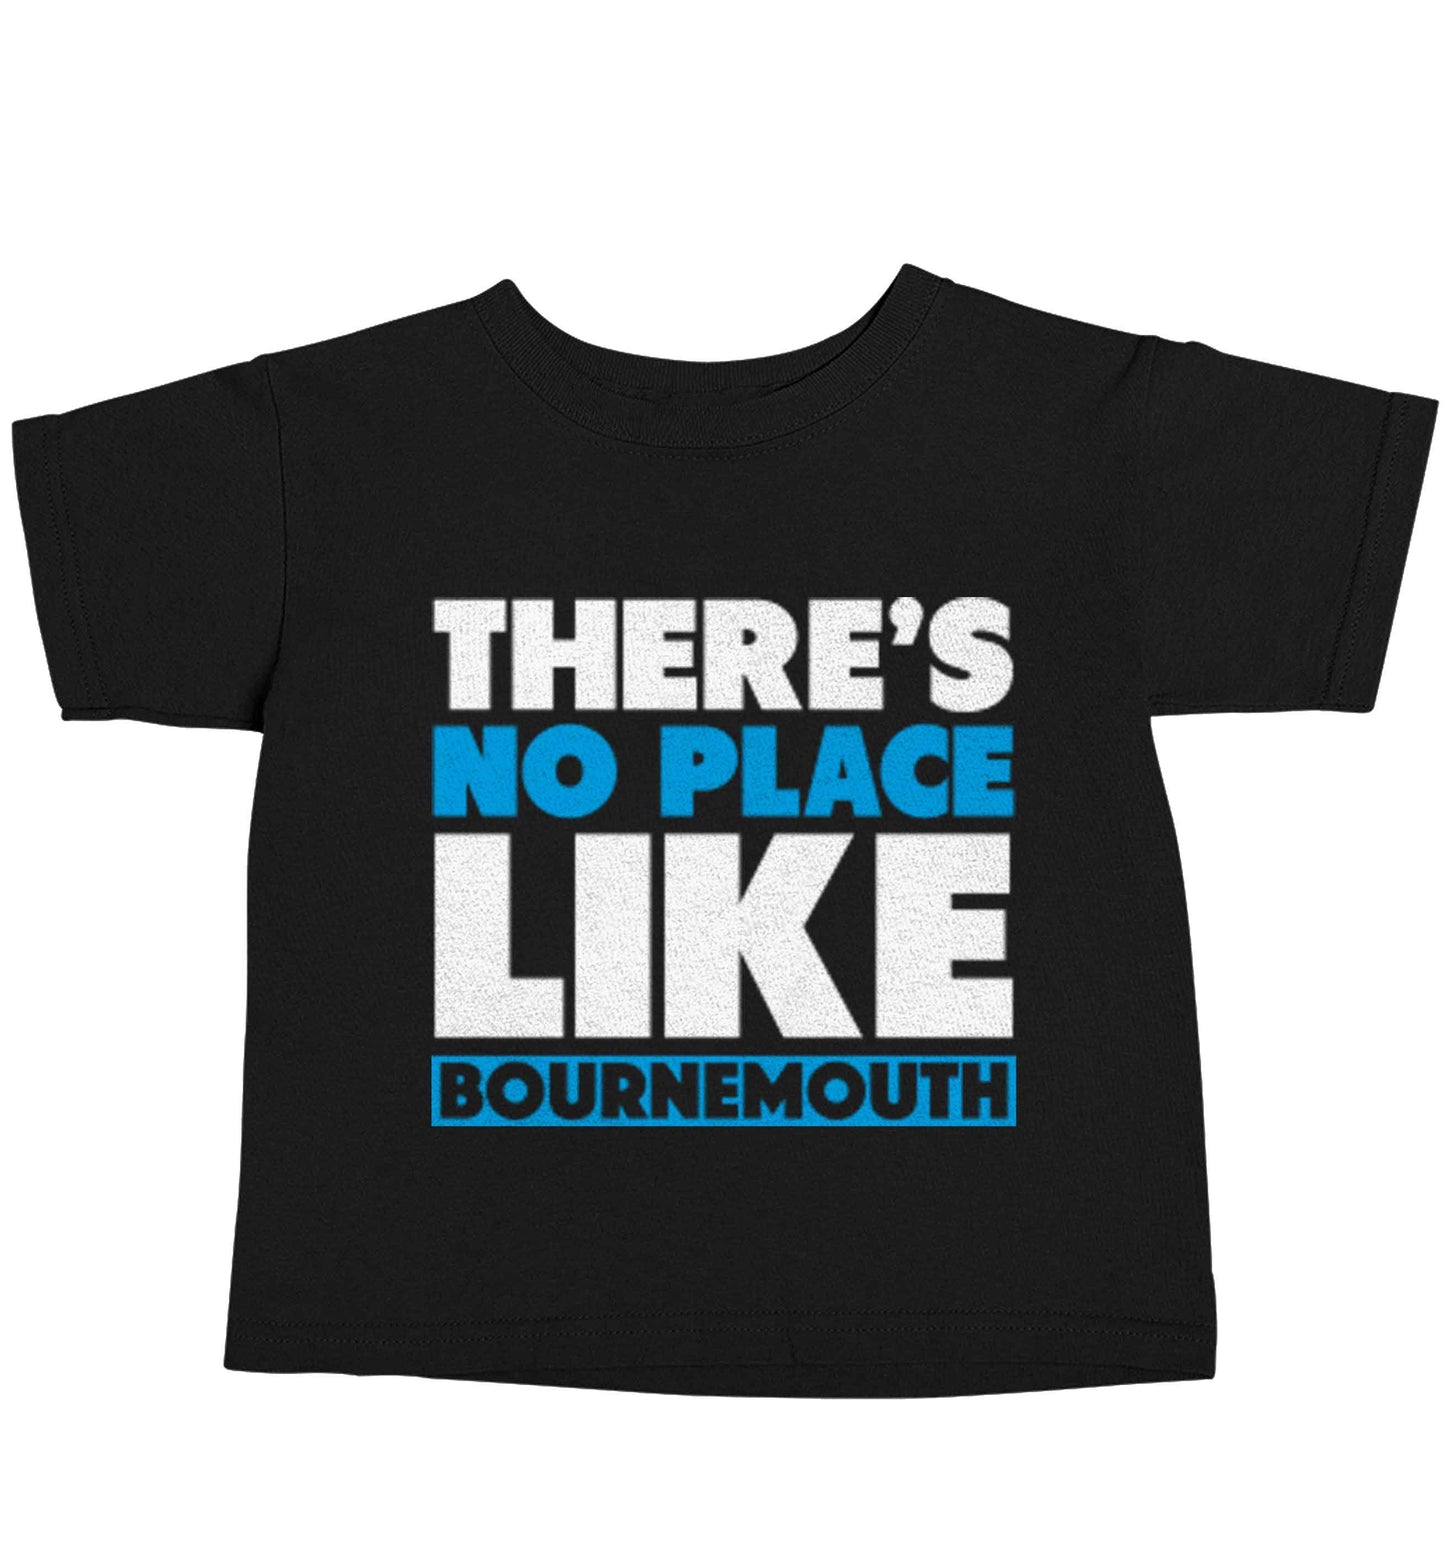 There's no place like Bournemouth Black baby toddler Tshirt 2 years